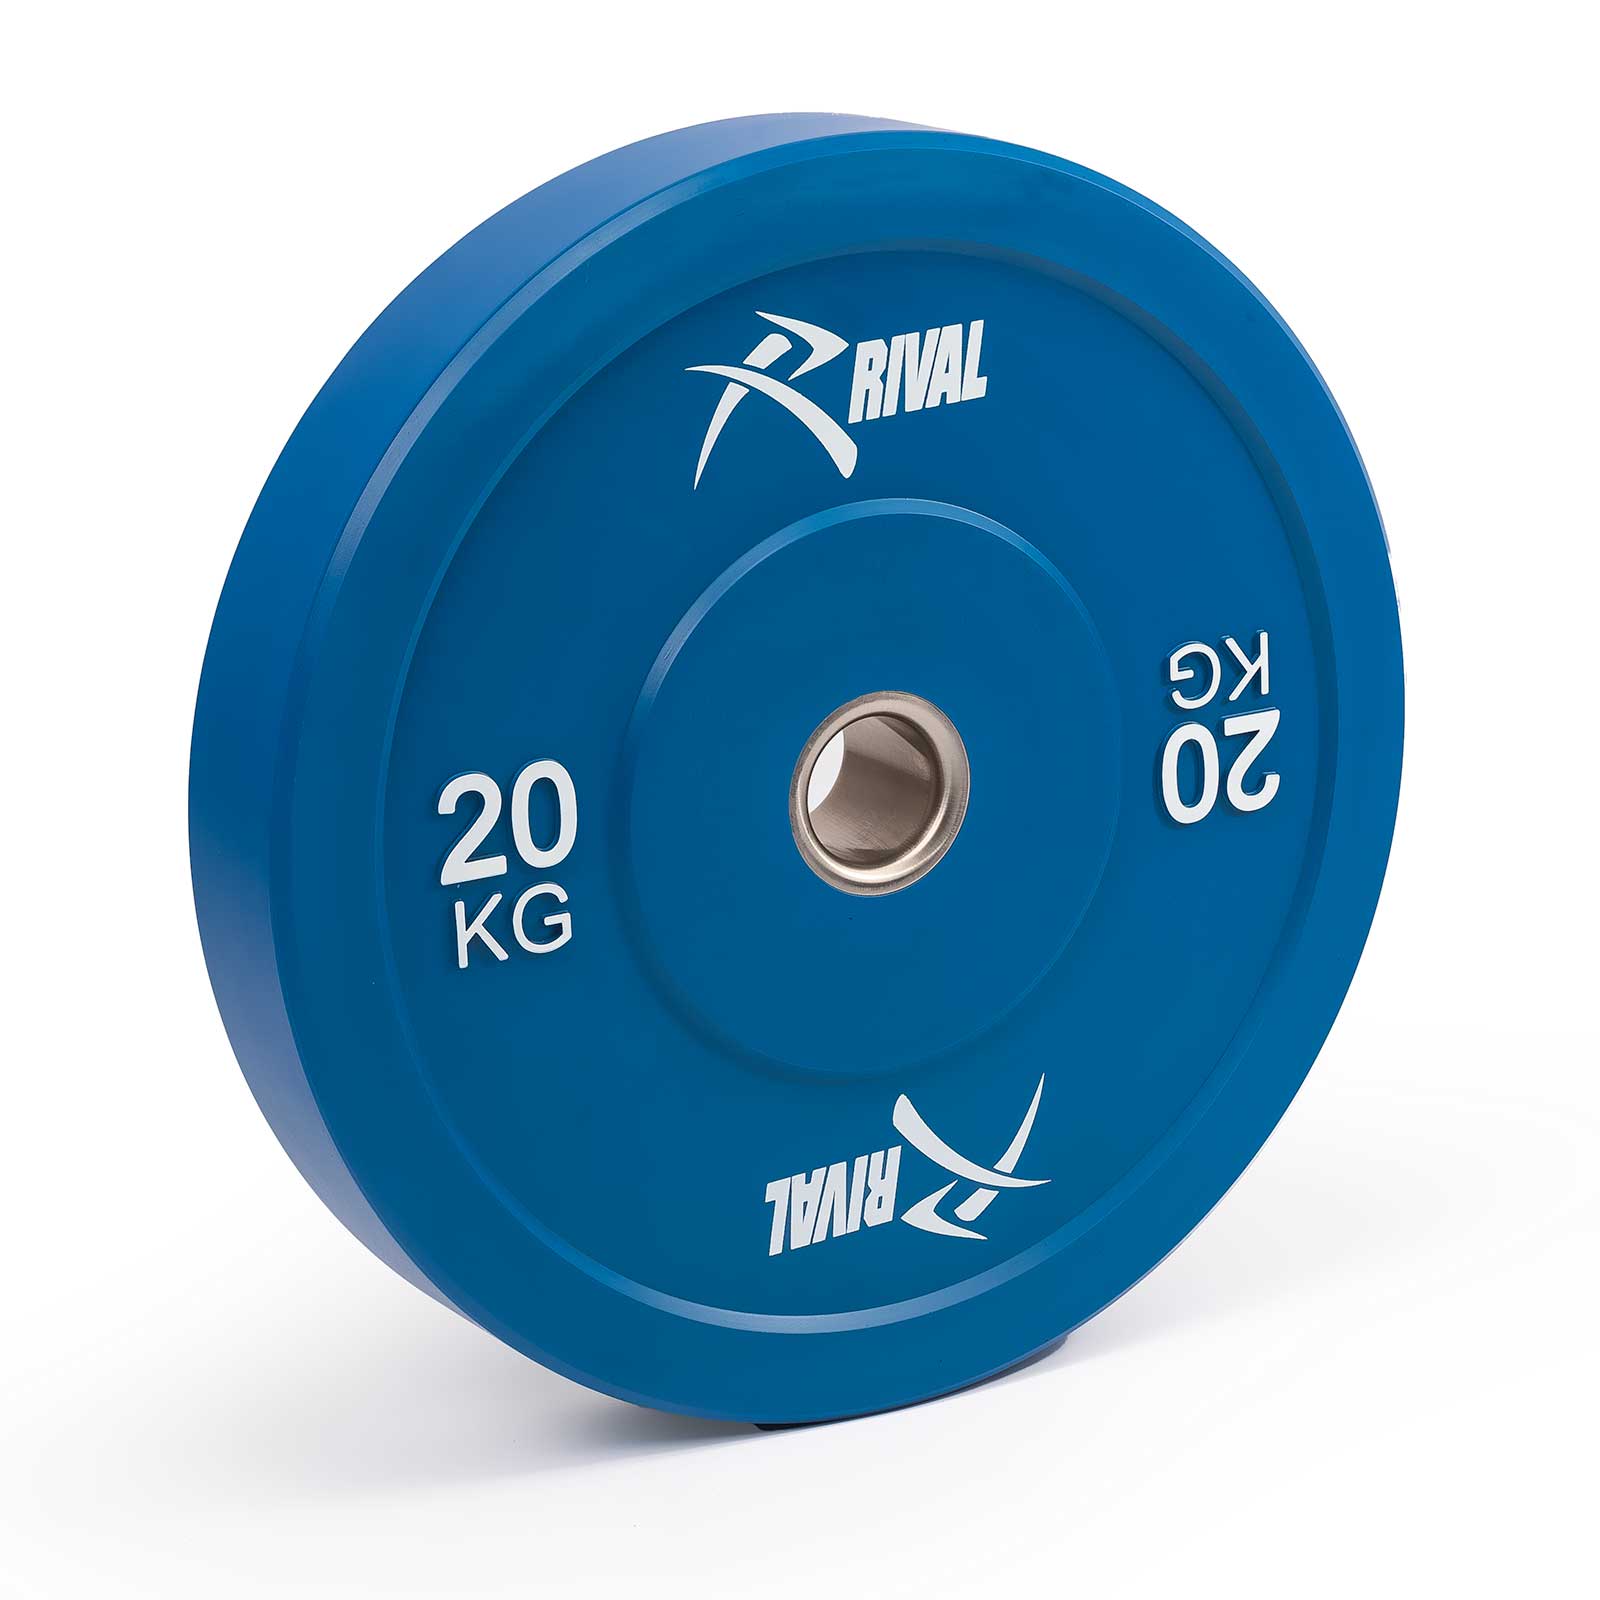 Rival Rubber Bumper Plate 20kg | Weights | Home Gym Equipment | Fitness ...